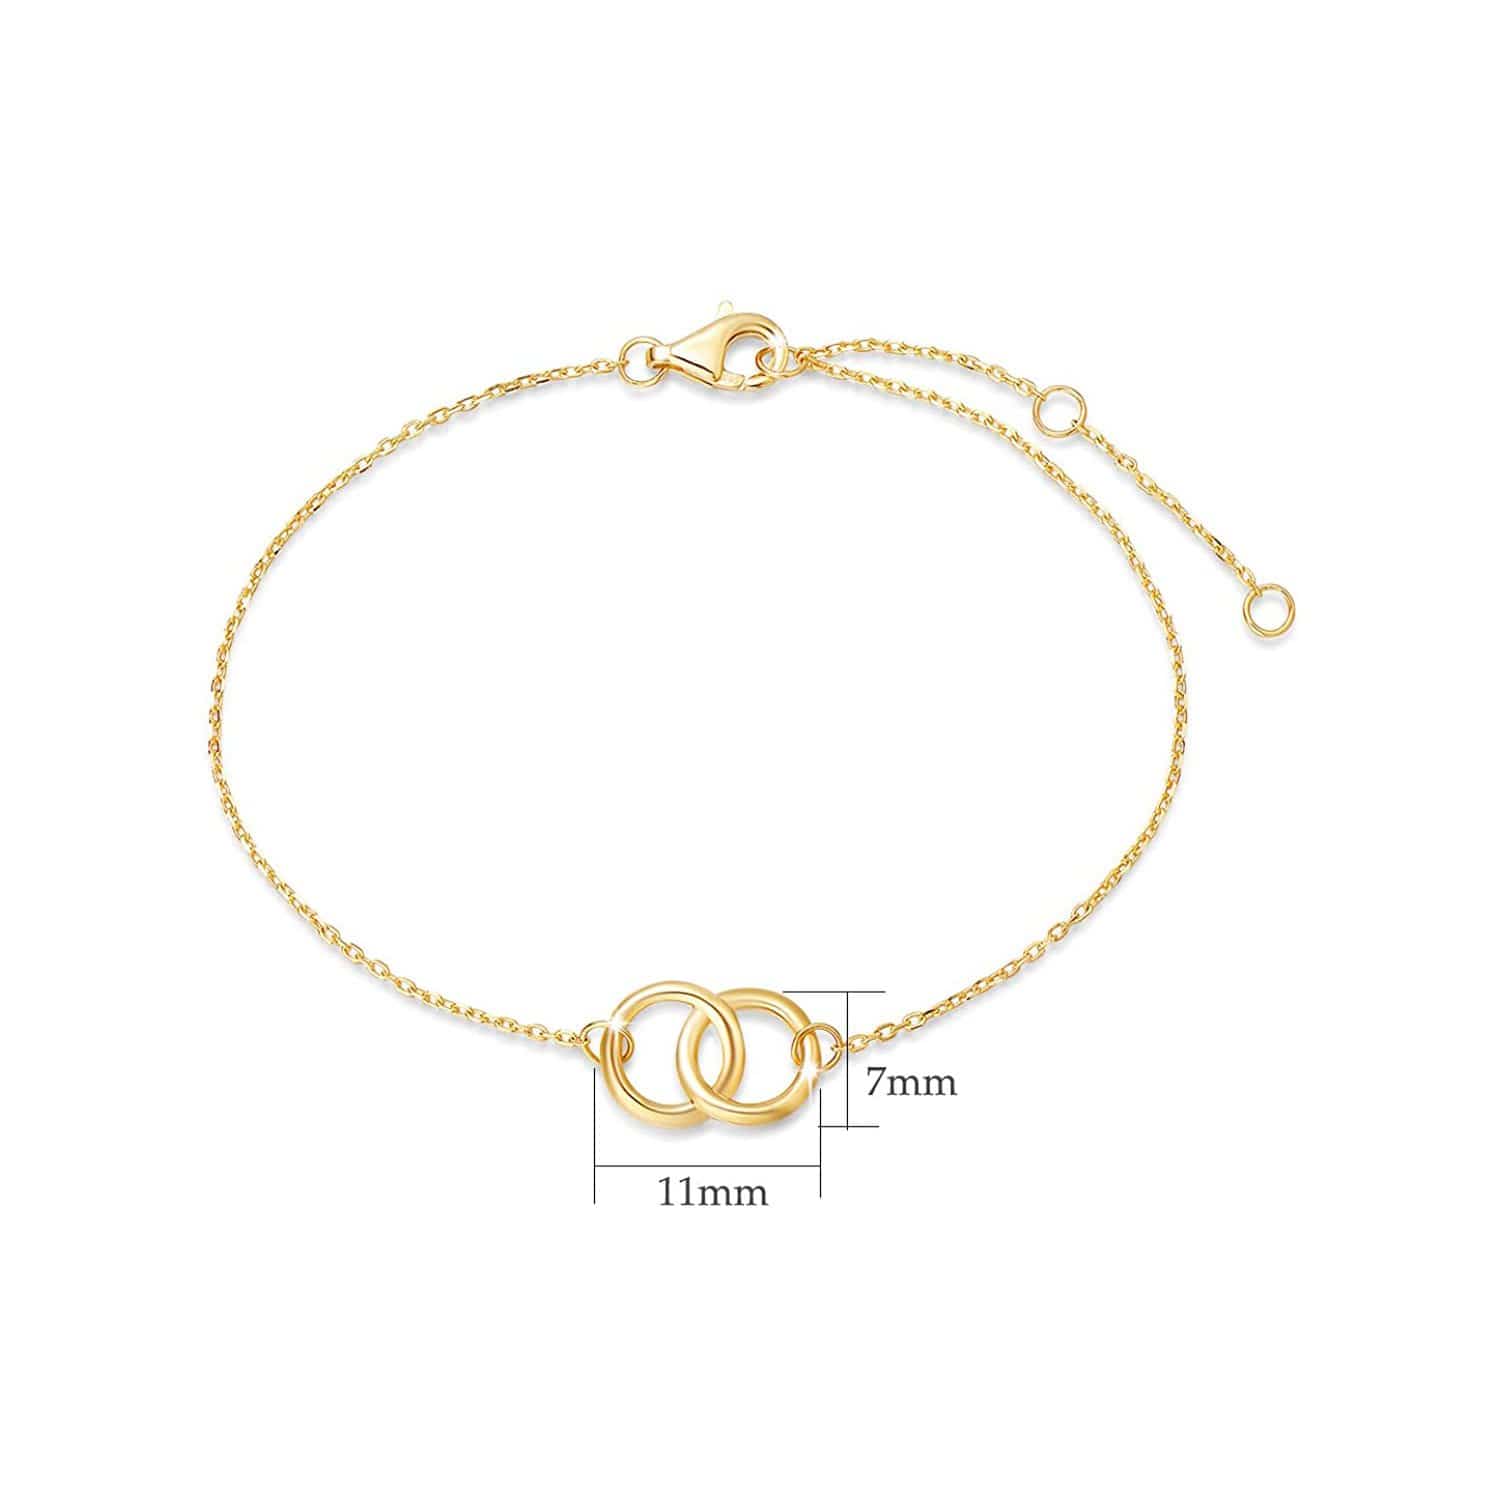 FANCIME Two Circle Friendship 14k Solid Yellow Gold Bracelet Size